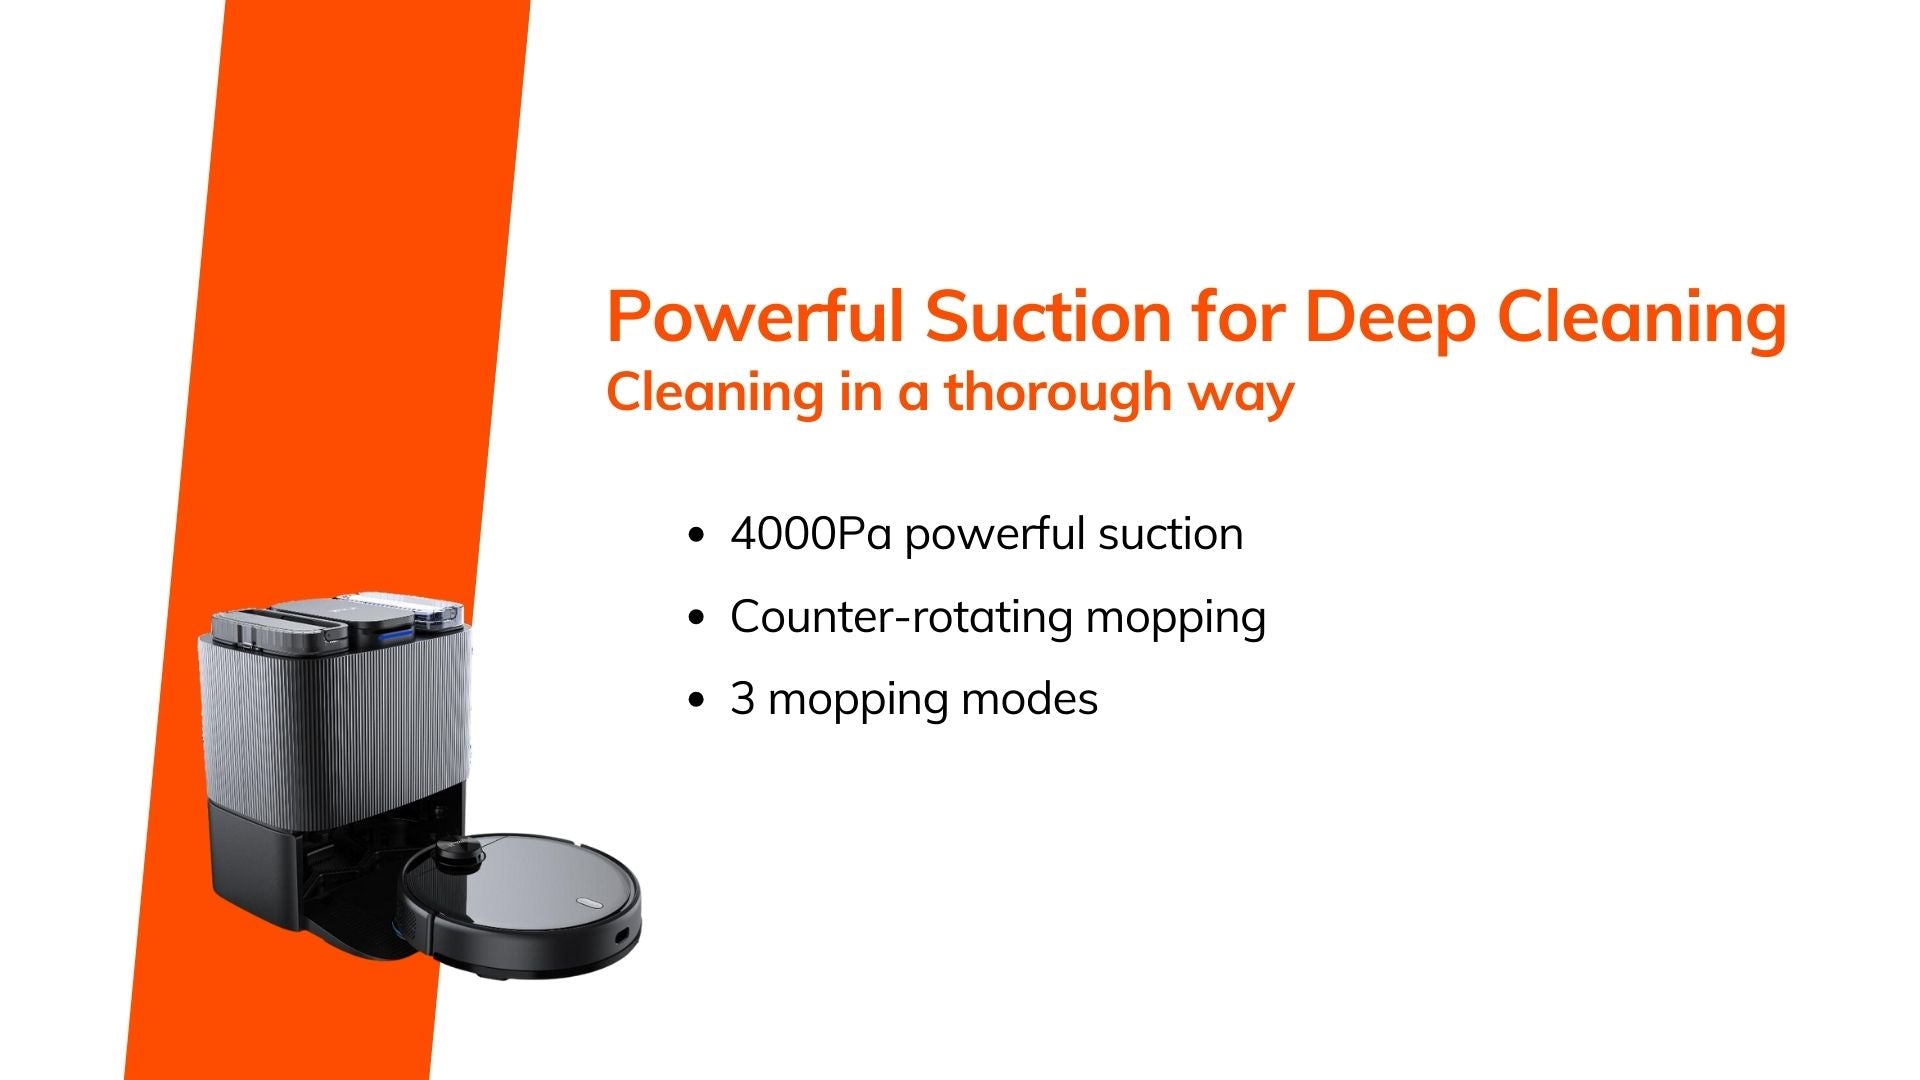 Powerful Suction 4000Pa - deep cleaning